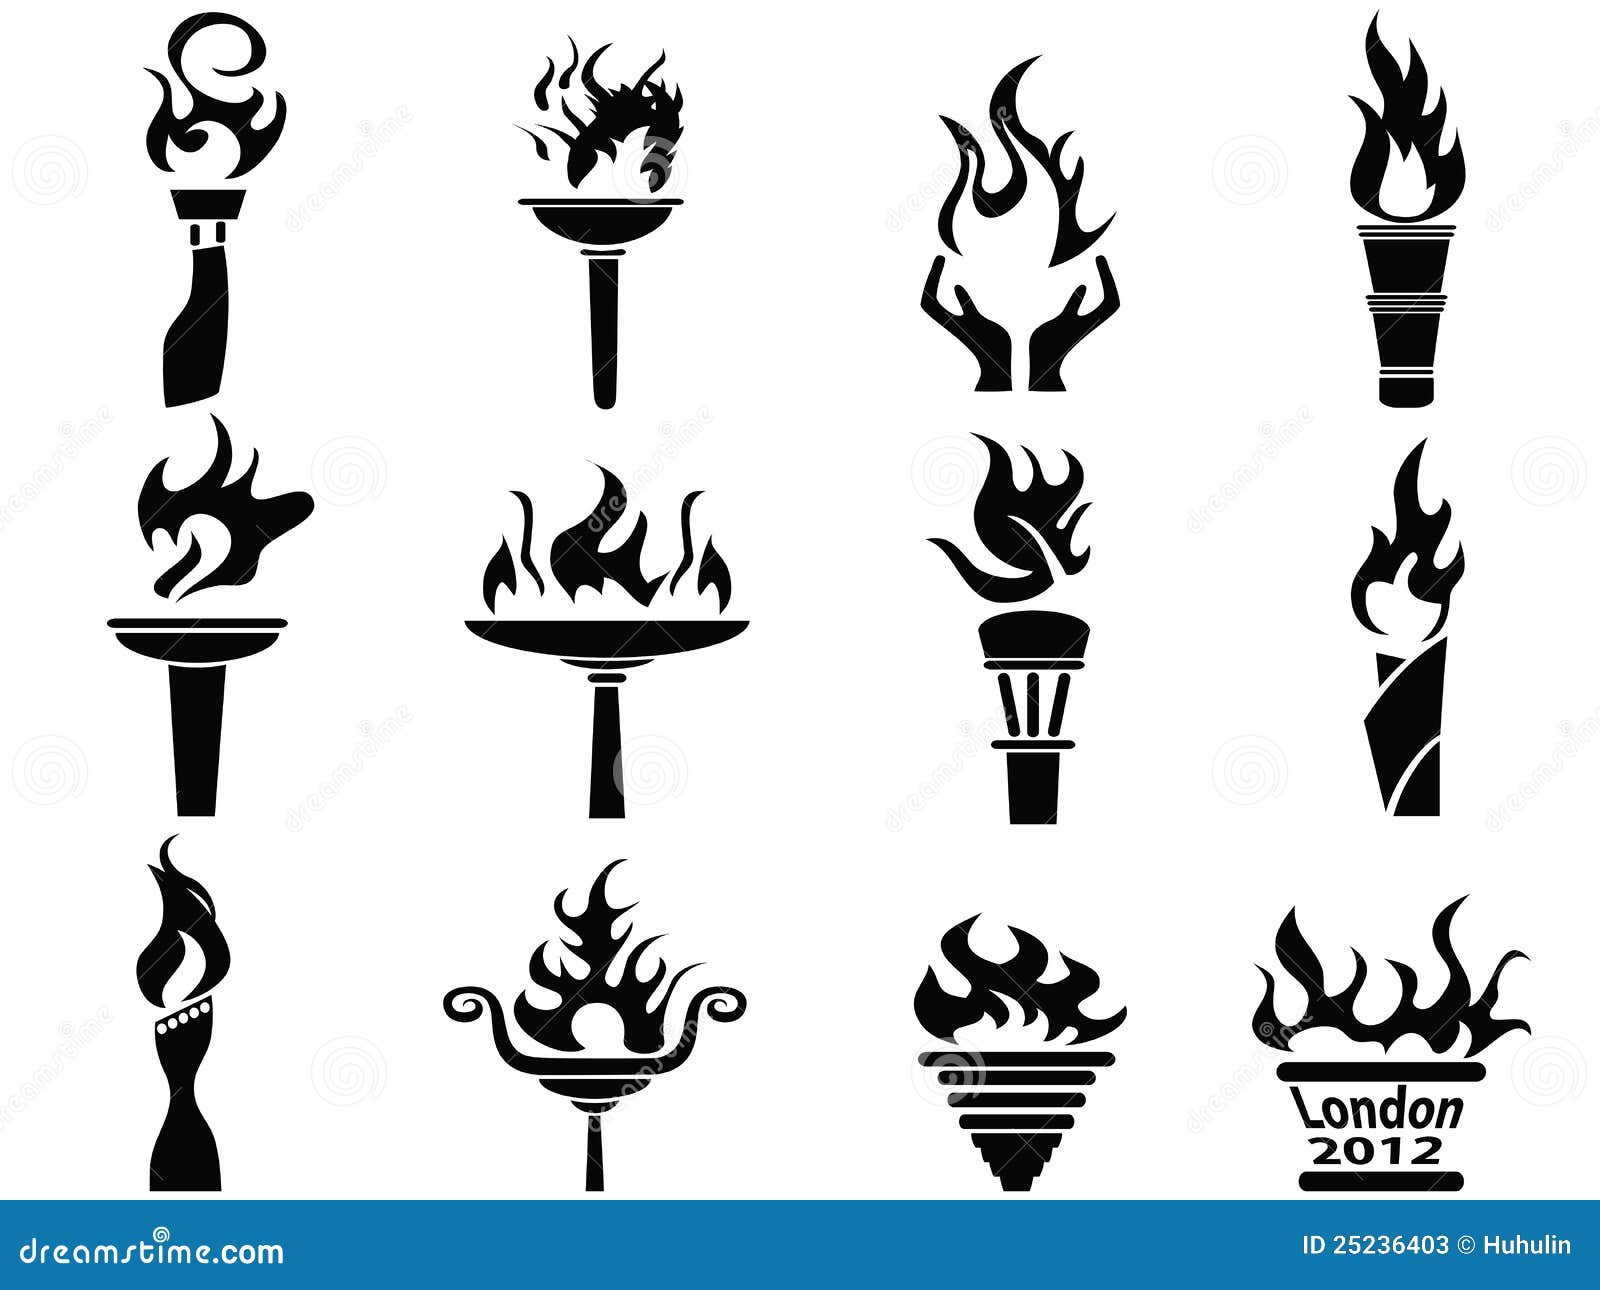 vector clipart torch - photo #40